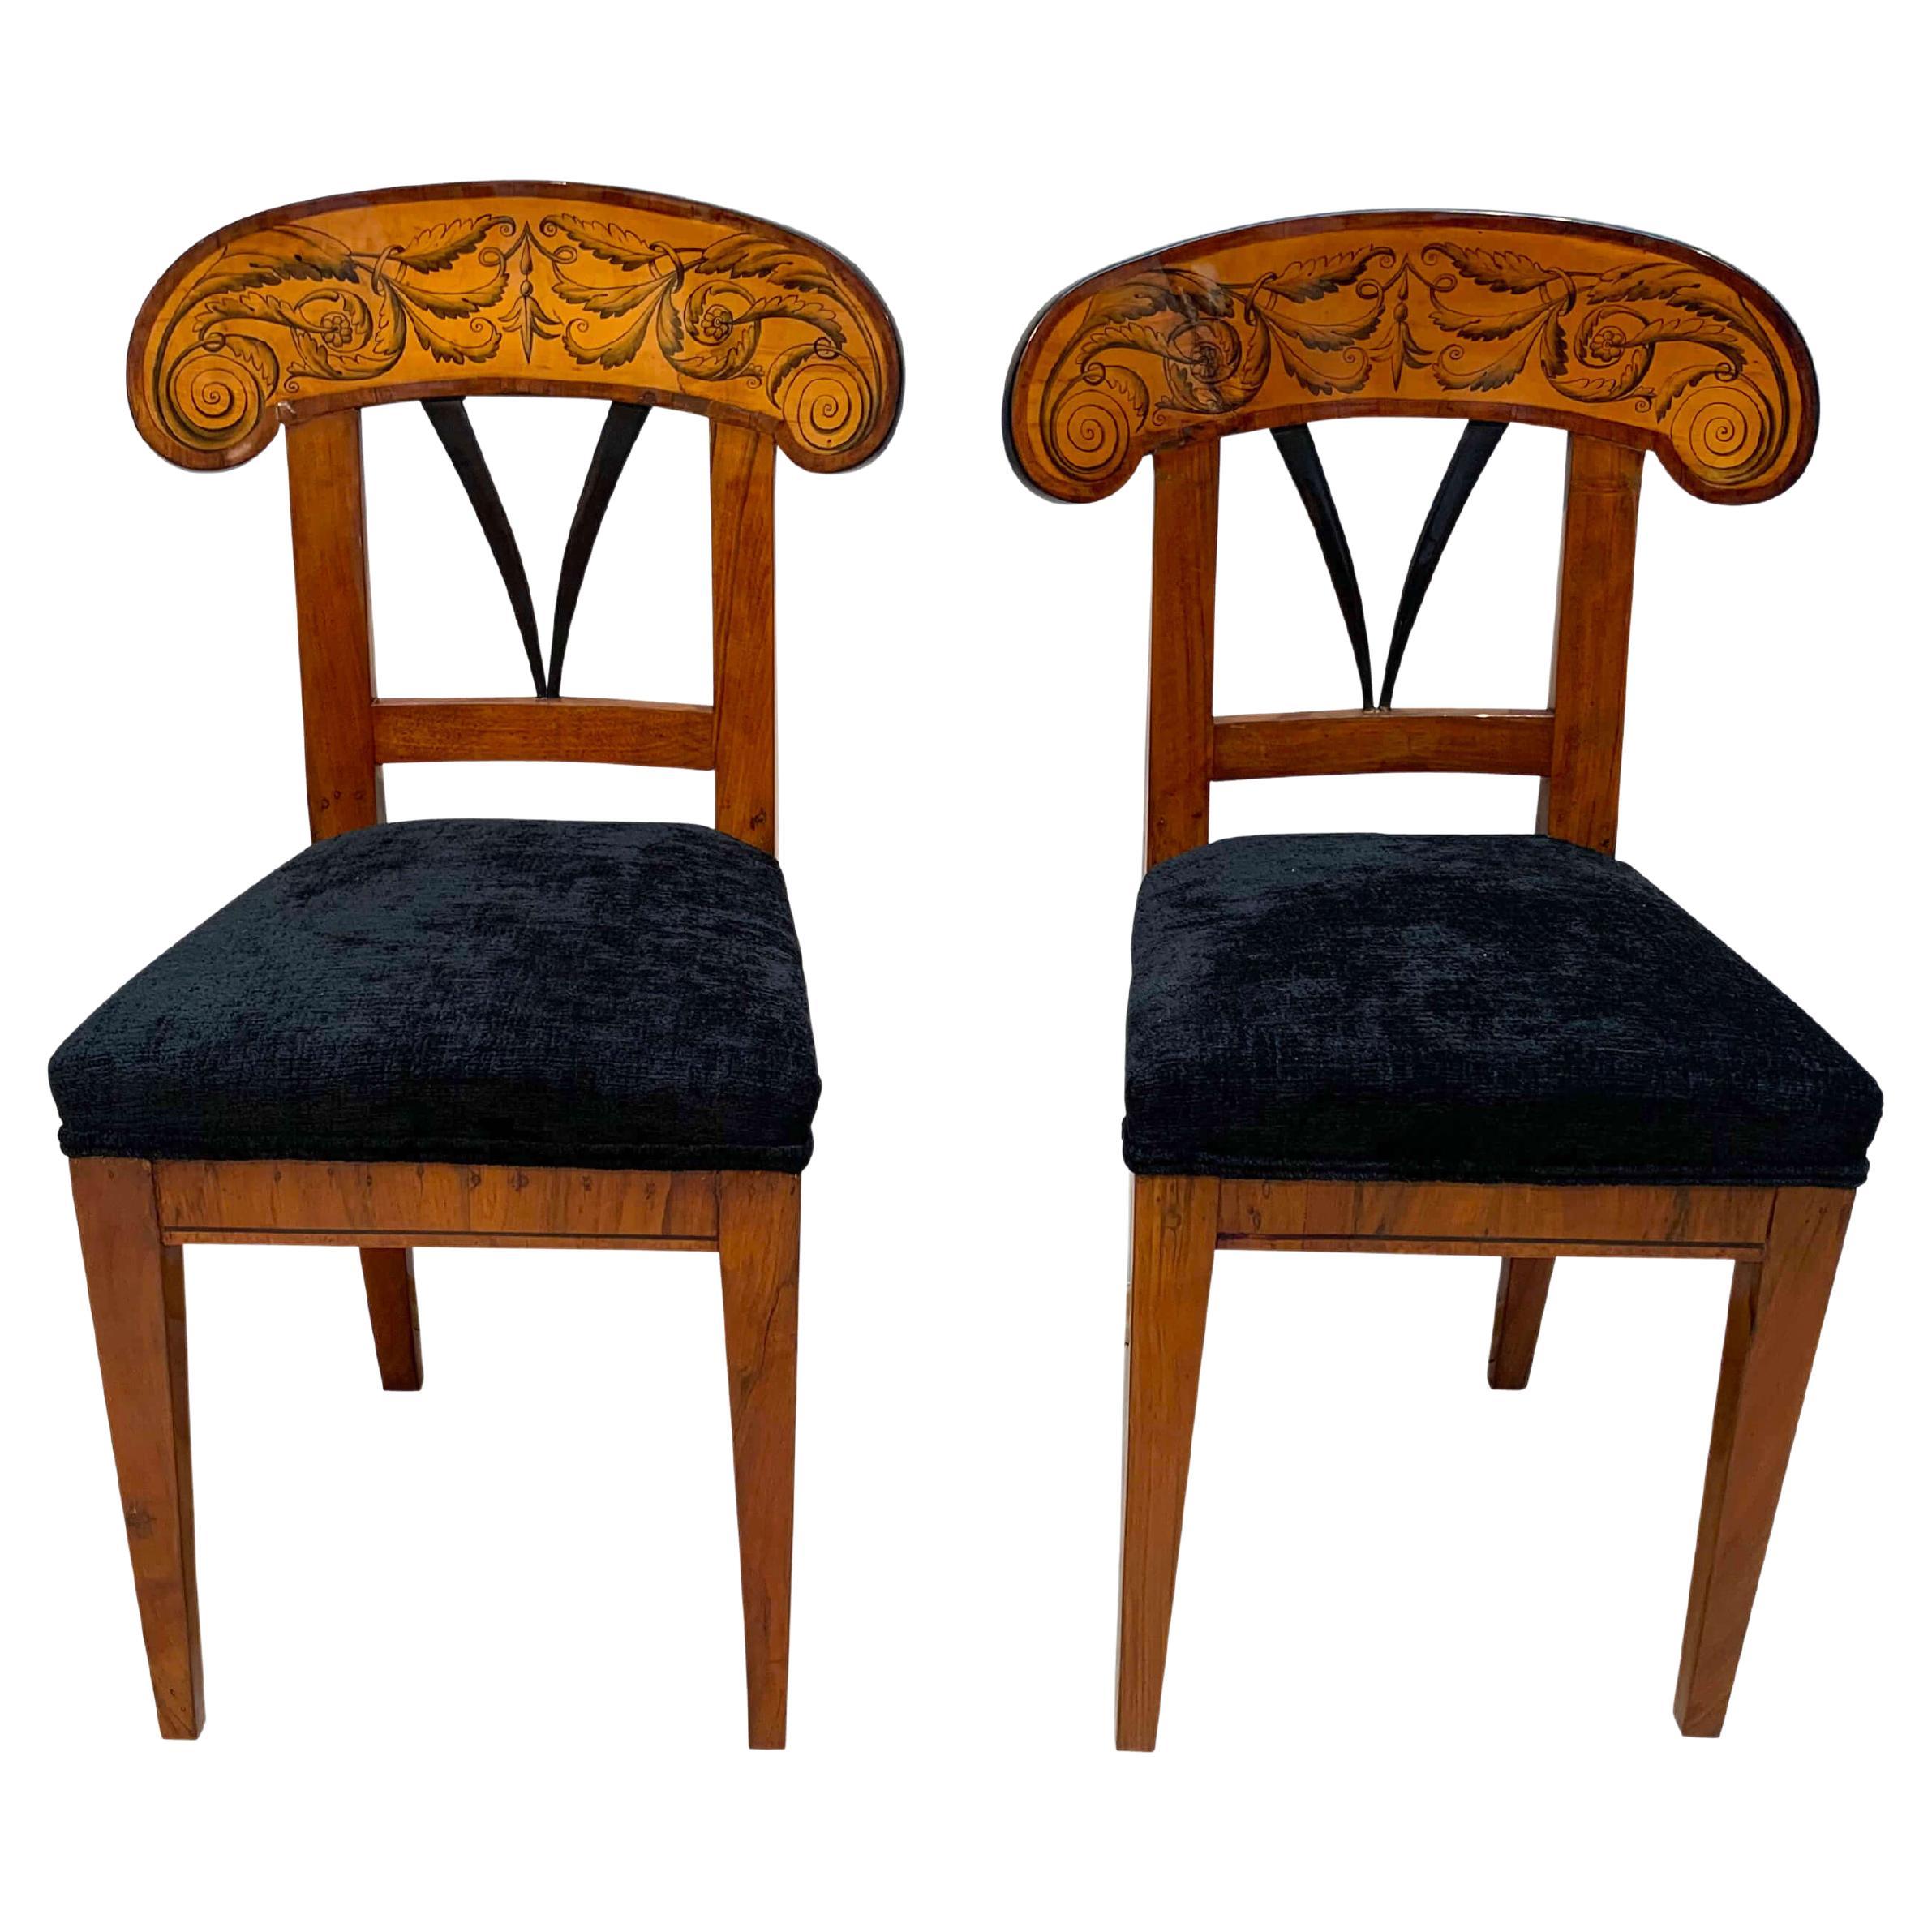 Pair of Biedermeier Shovel Chairs with Ink Painting, Walnut, South German, 1830s For Sale